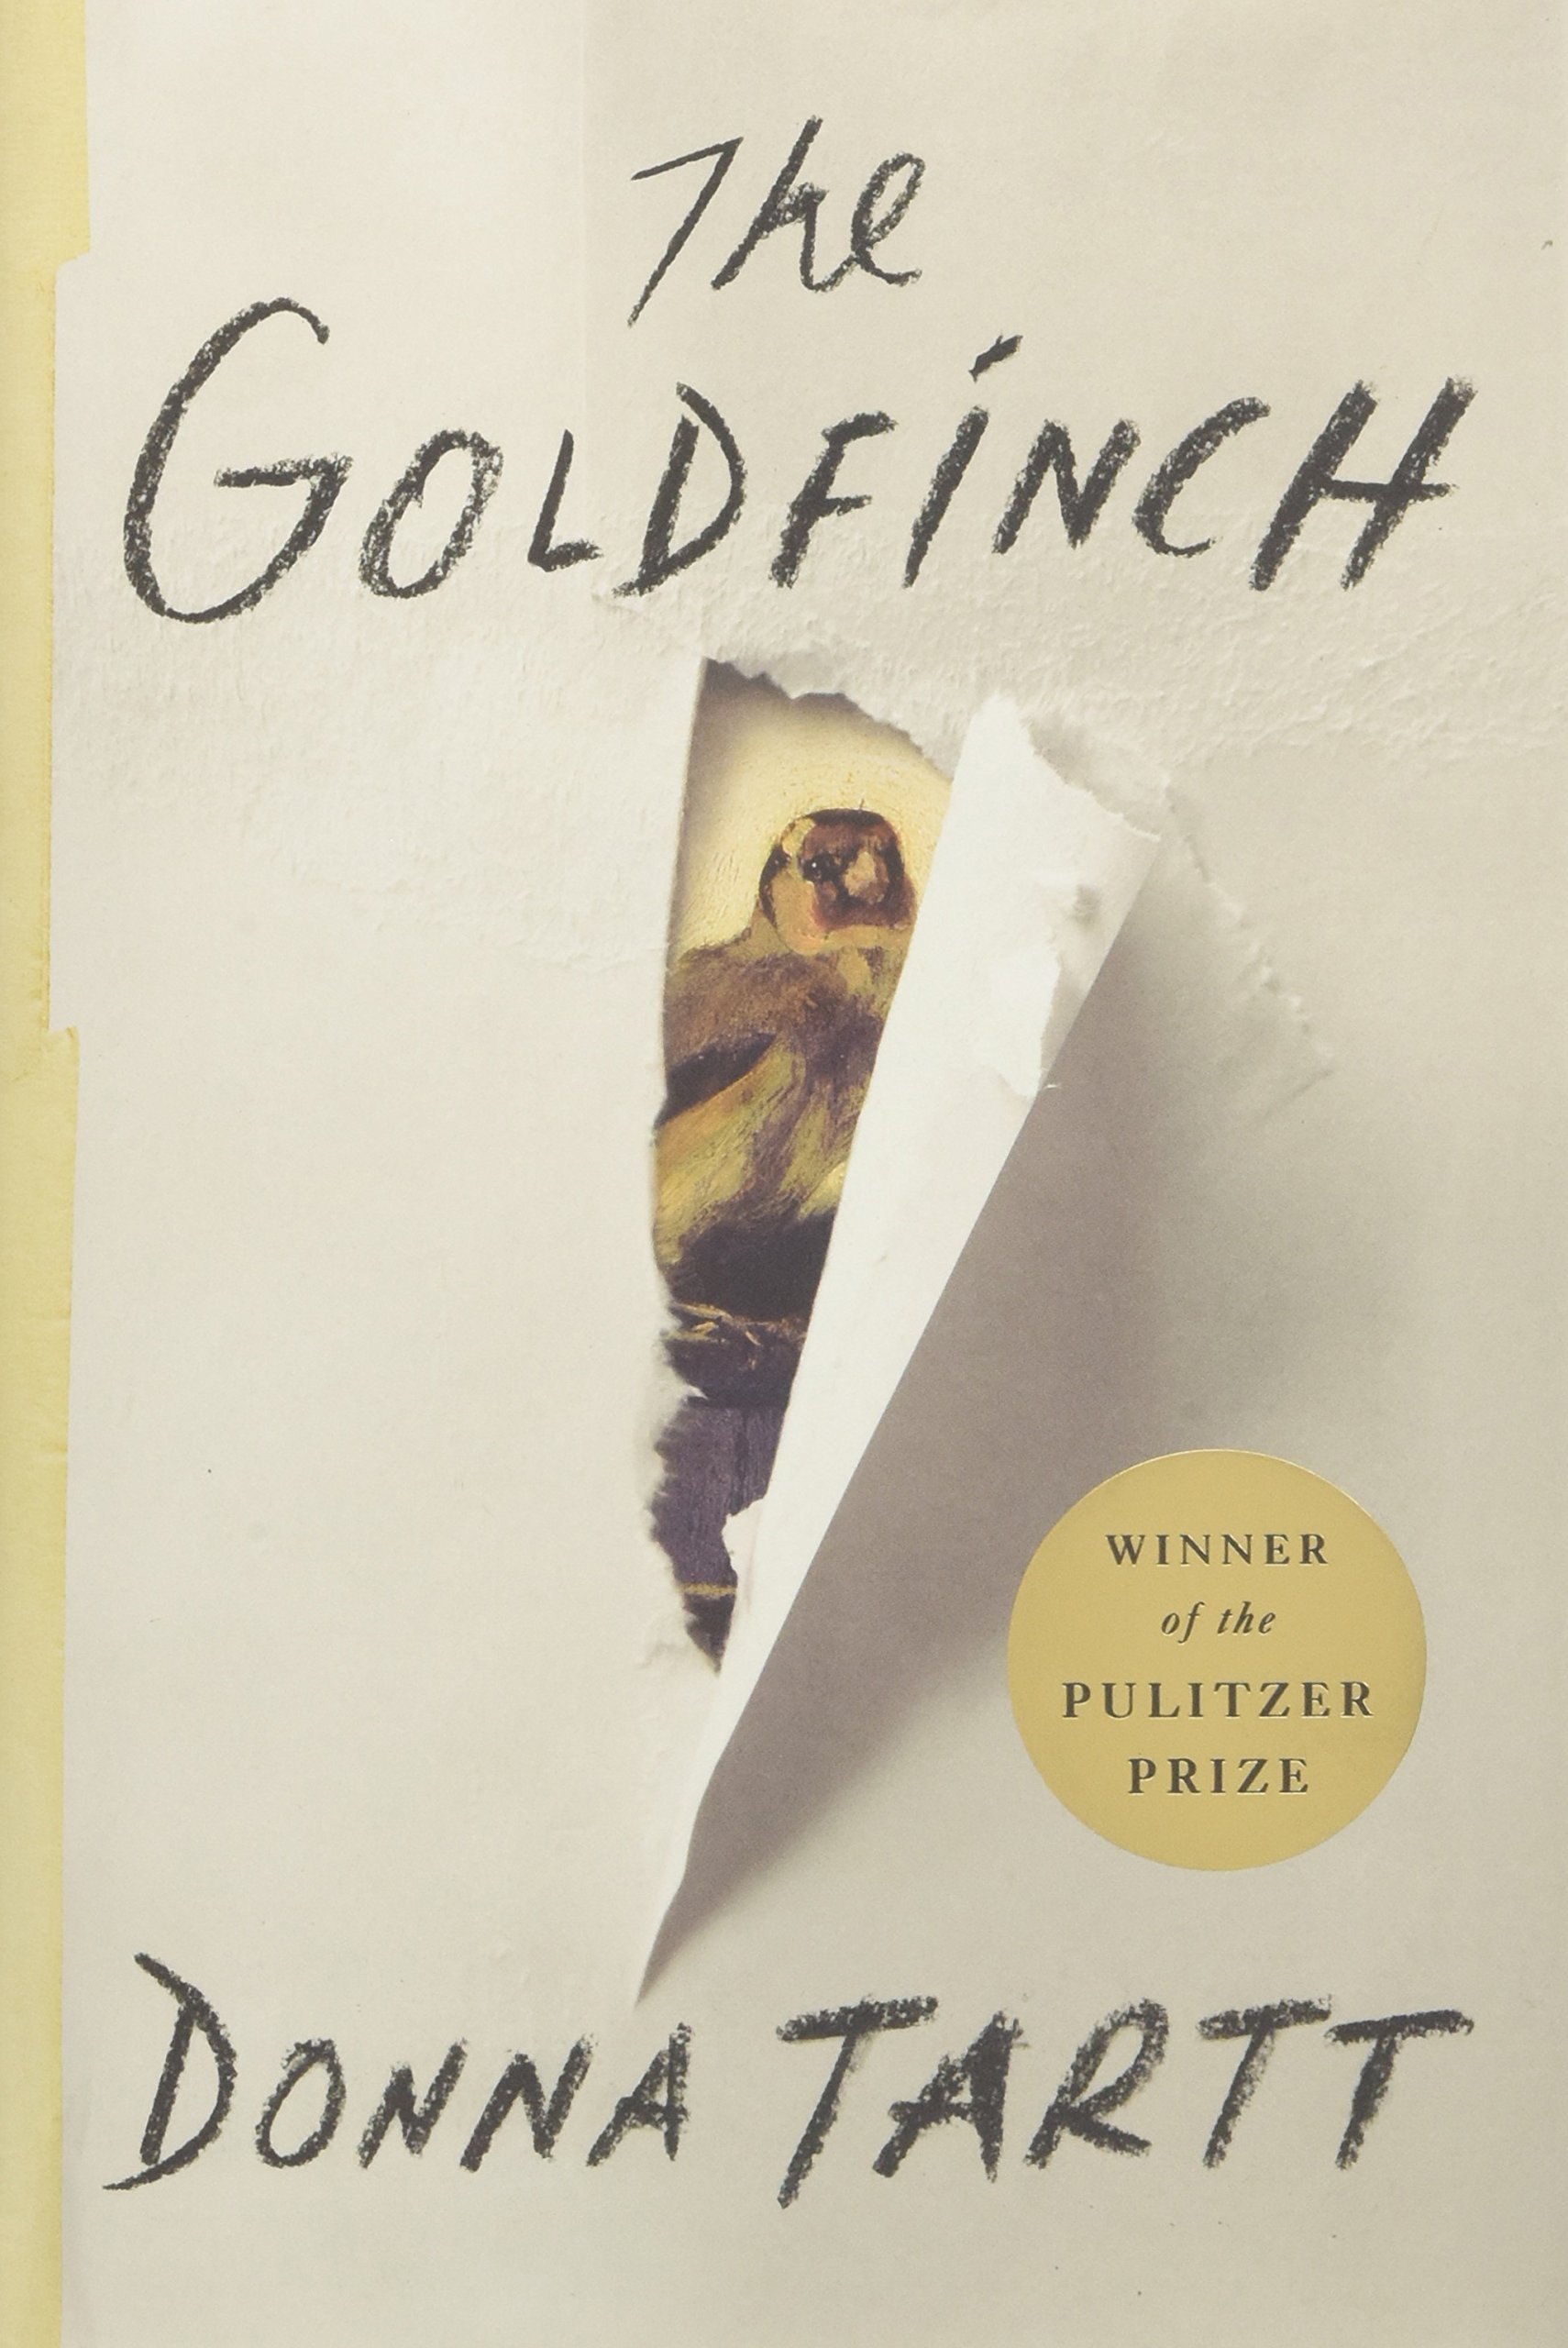 A torn cover of "the goldfinch" by donna tartt, revealing a painting of a bird, with a label indicating it's a pulitzer prize winner.